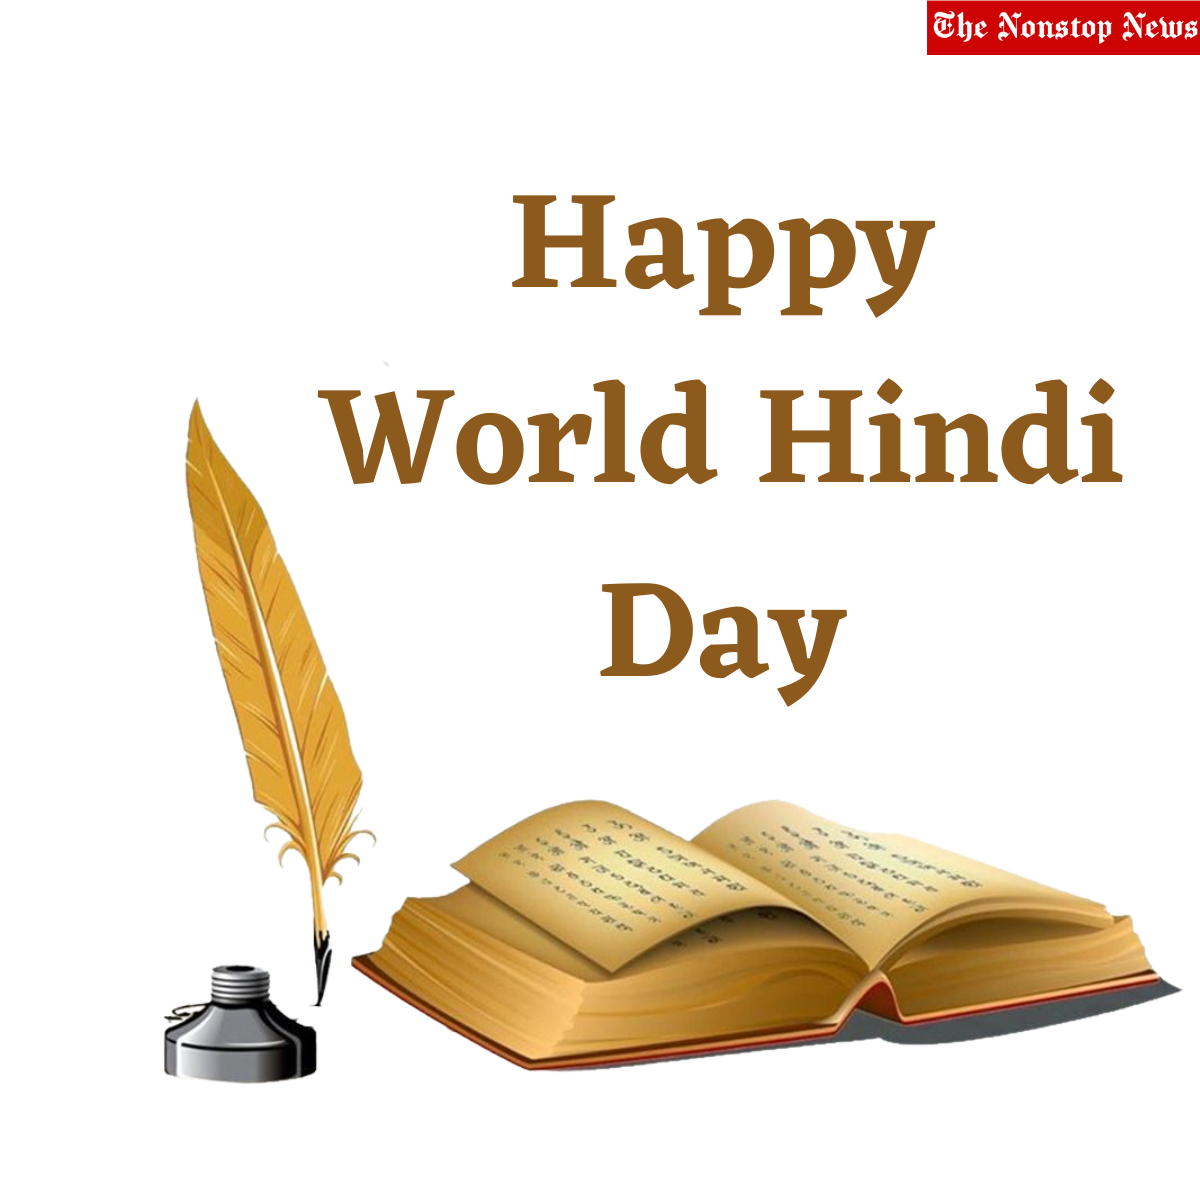 Happy World Hindi Day 2023 Wishes, Messages, Greetings, Quotes, Images, Slogans, SMS, Shayari, Posters and Banners